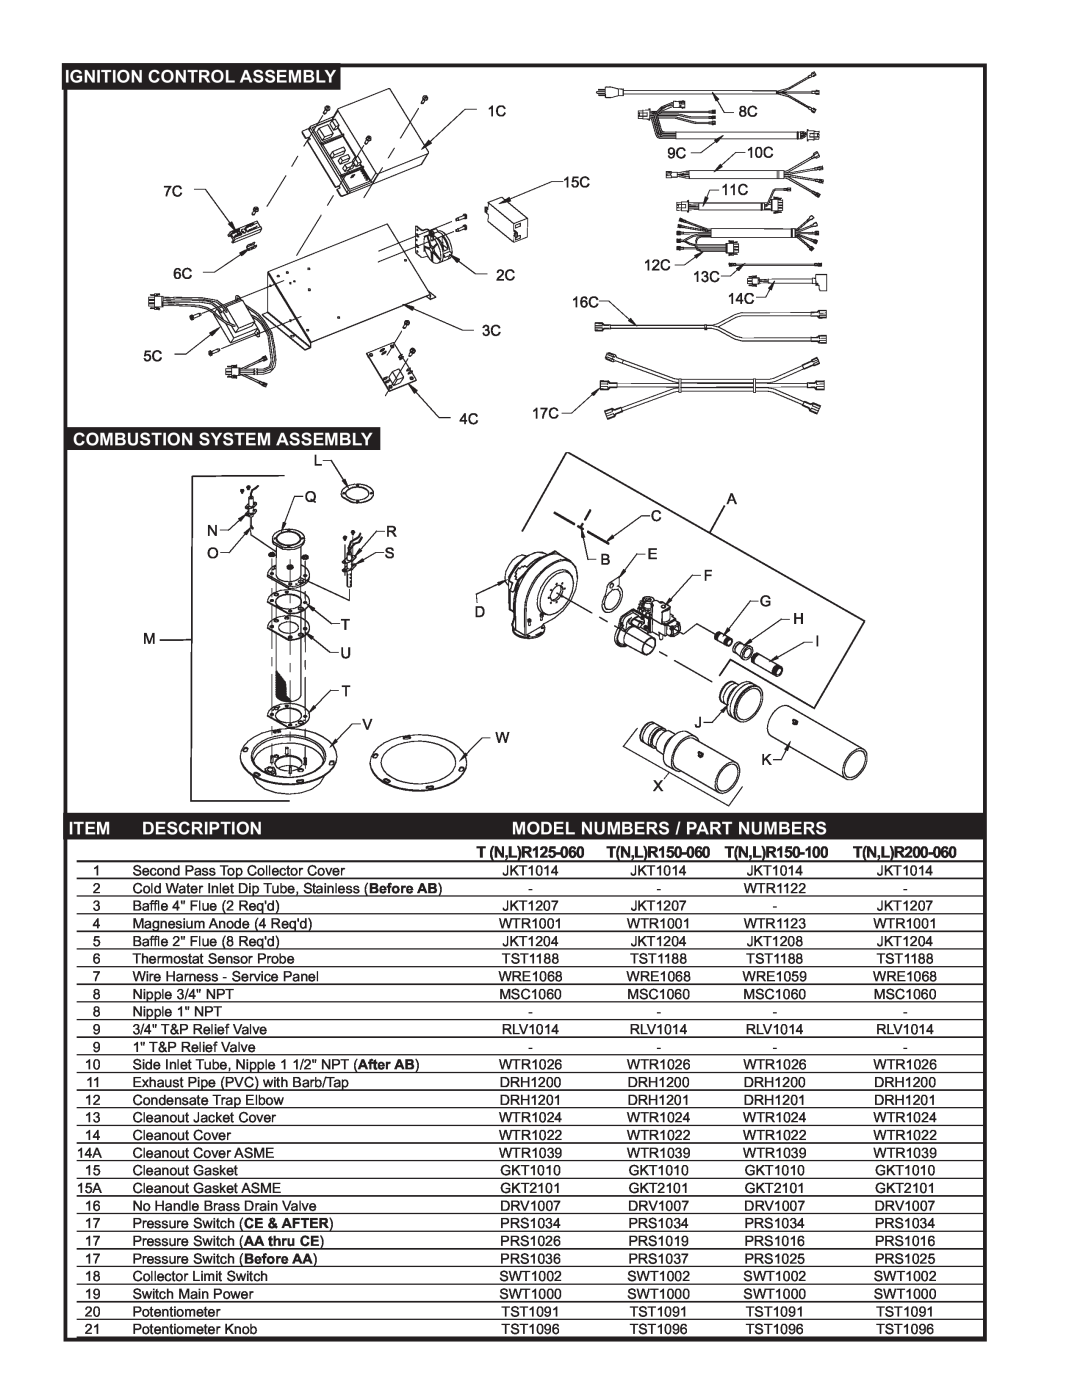 Lochinvar TurboCharger Ignition Control Assembly, Combustion System Assembly, Description, Model Numbers / Part Numbers 